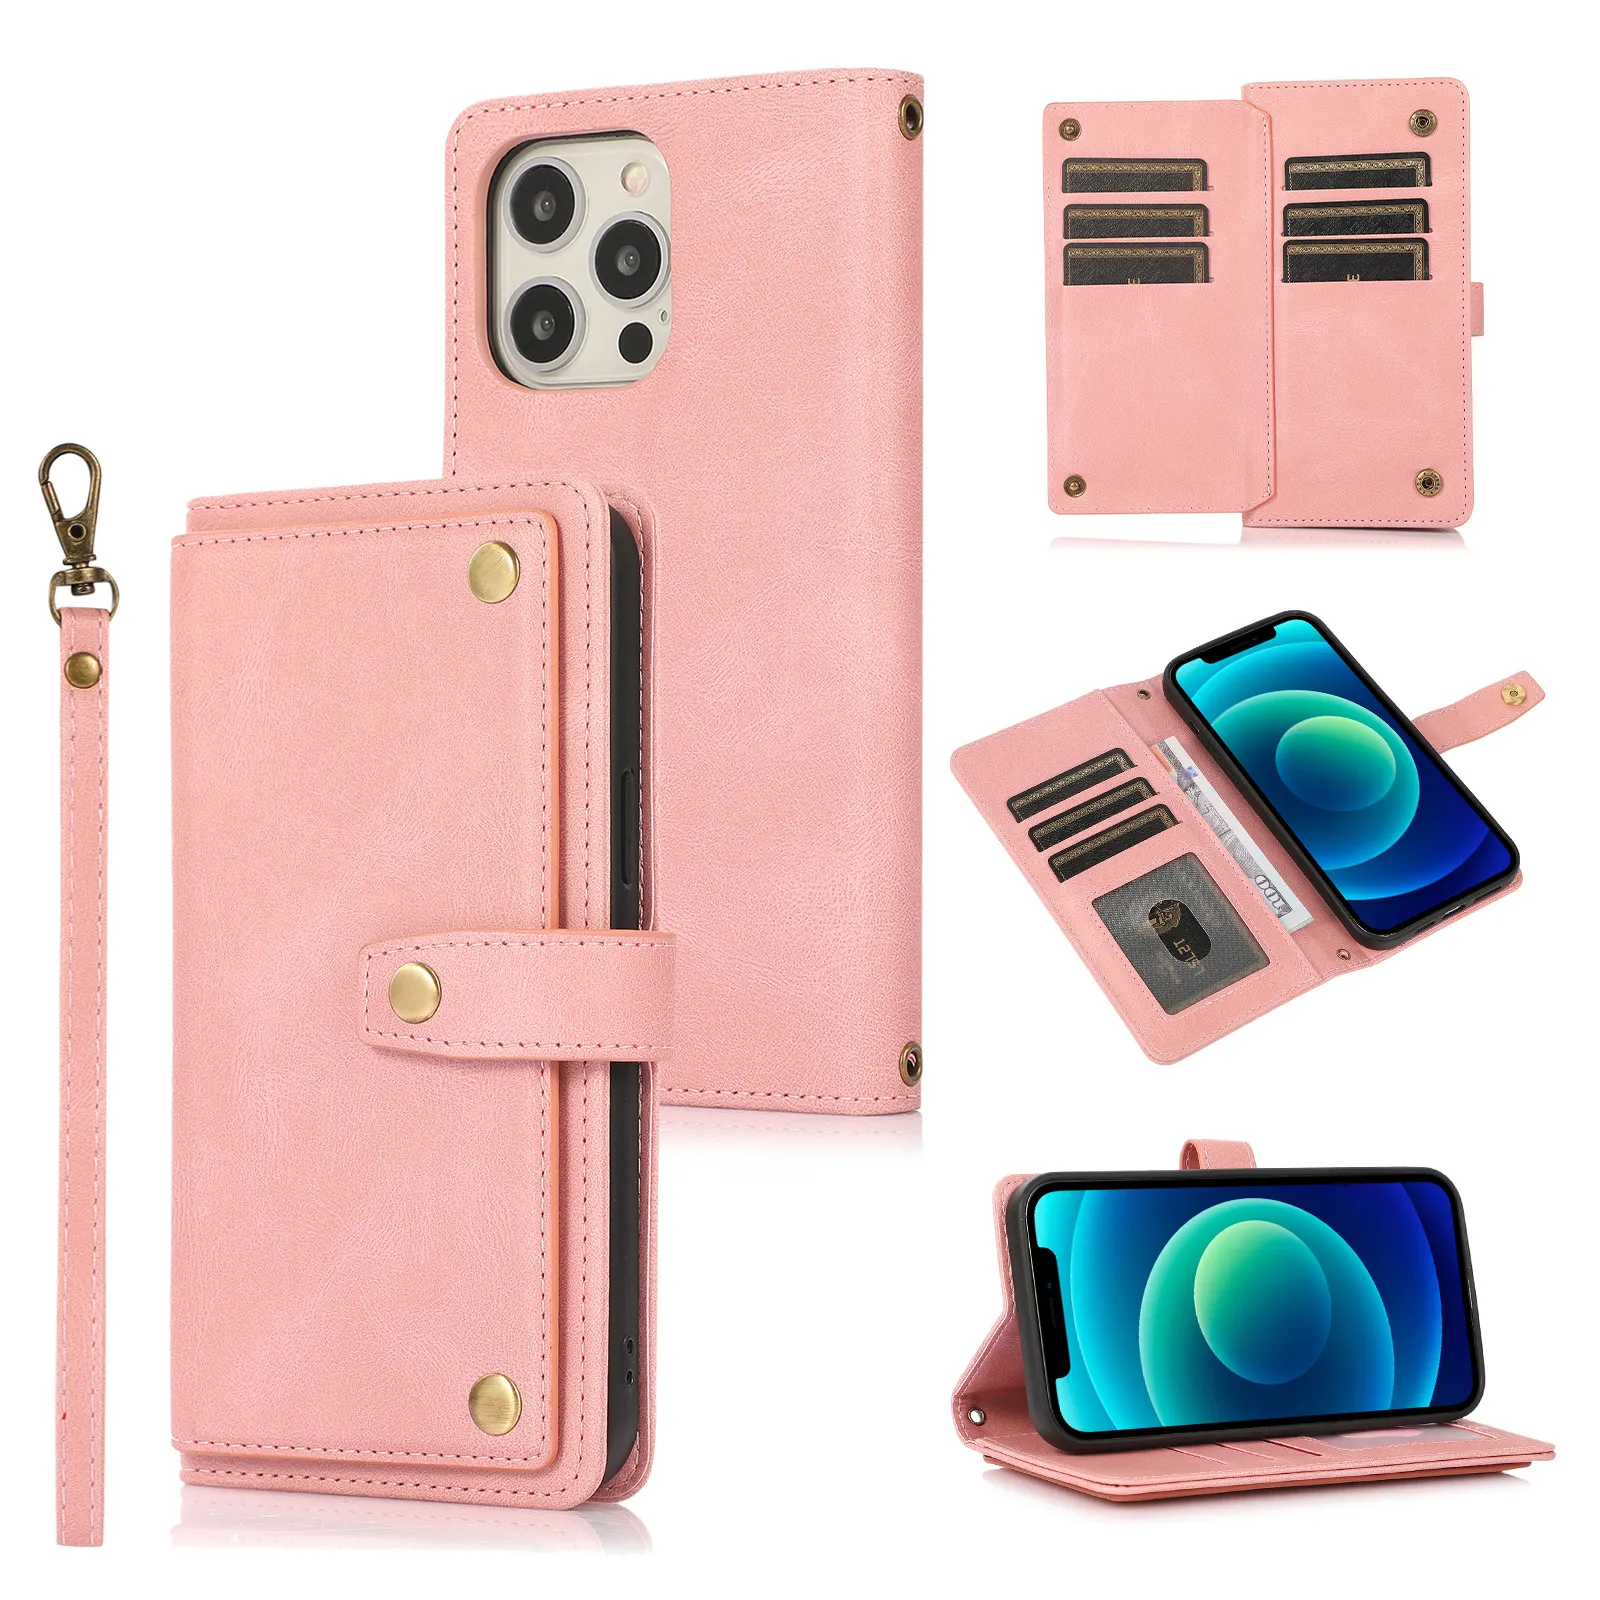 PU Leather Wallet Pouch Mobile Phone Case Factory Cell Phone Leather Cover Bag Skin For Iphone6/7/8/XR/Xs Max/11/12/13 Pro Max